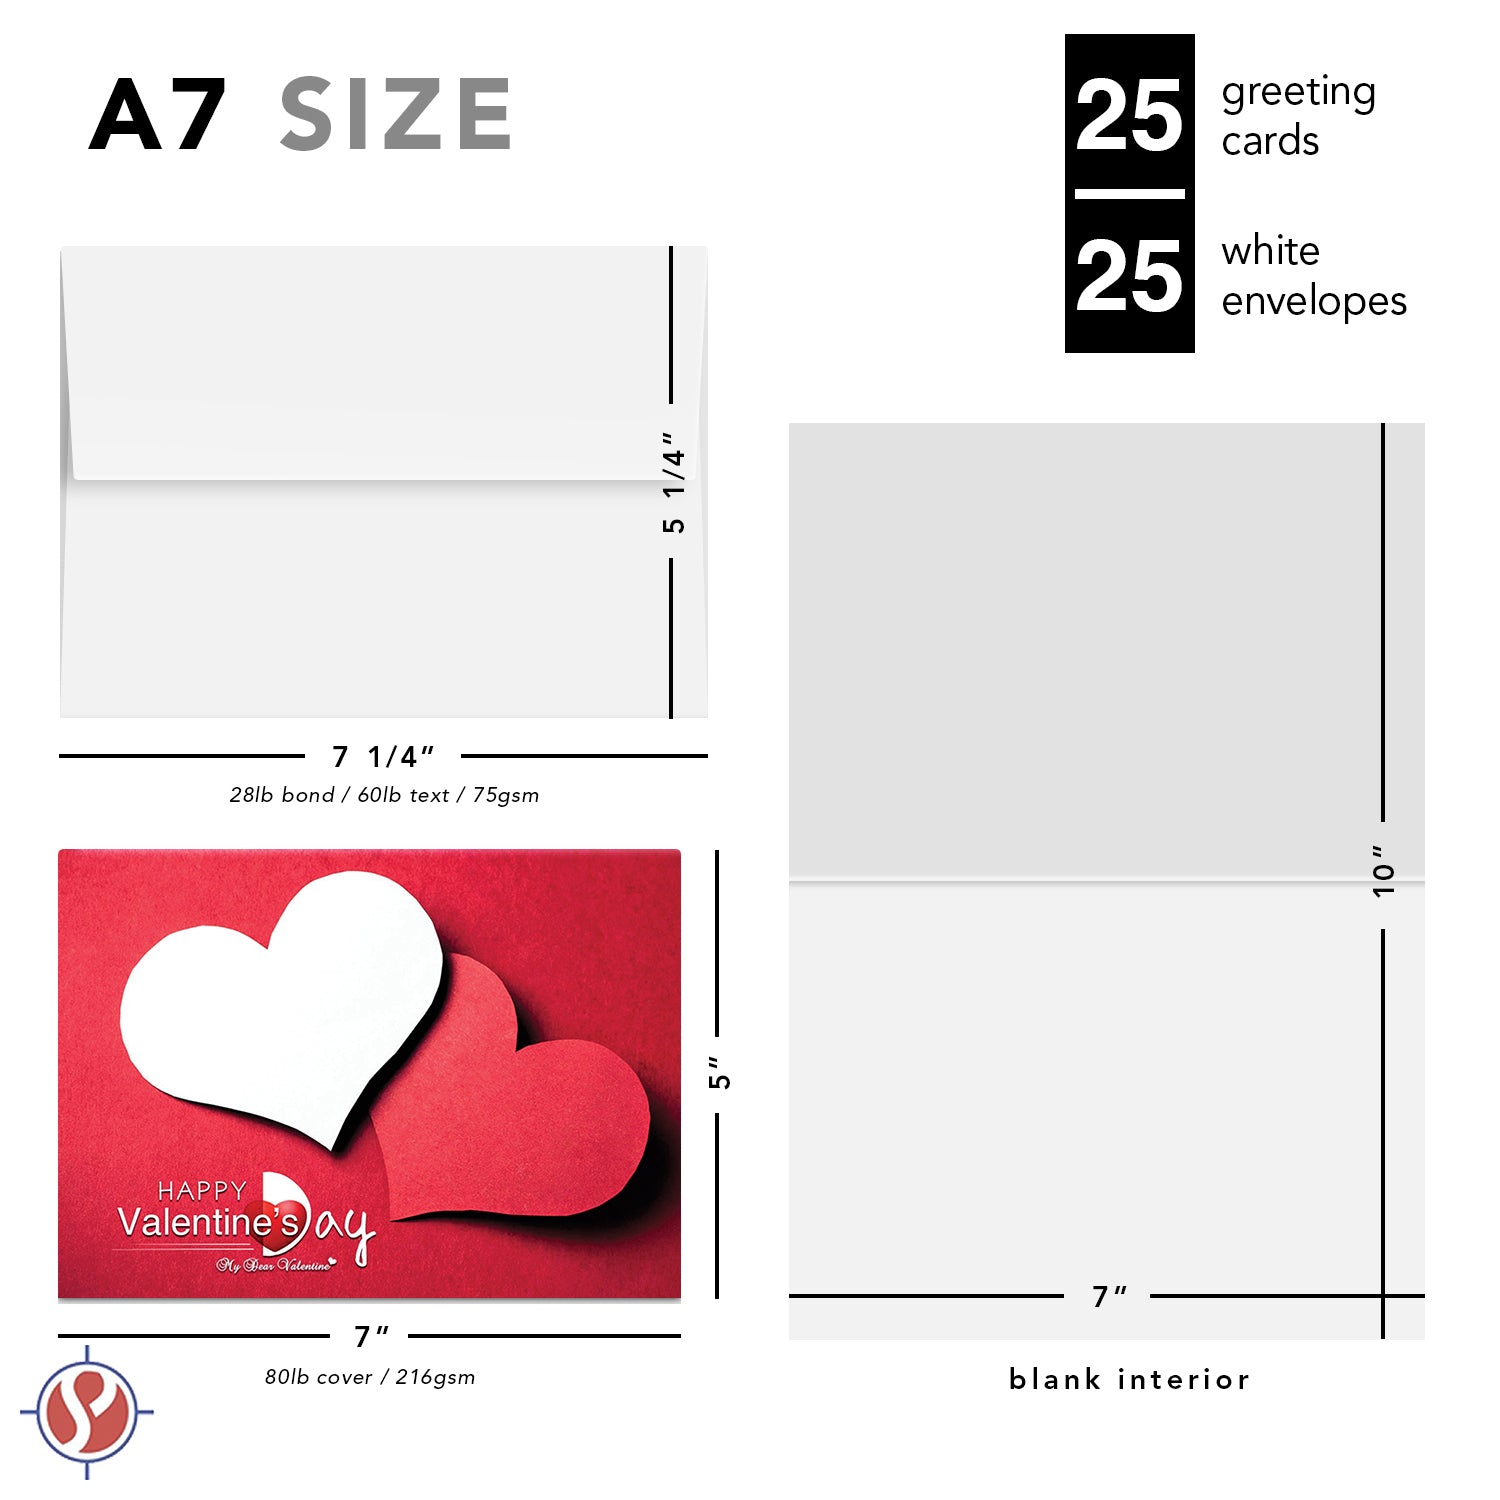 Love's Embrace: Red and White Heart Greeting Cards for a Romantic Valentine's Day Celebration with your Husband, Wife, Boyfriend, or Girlfriend